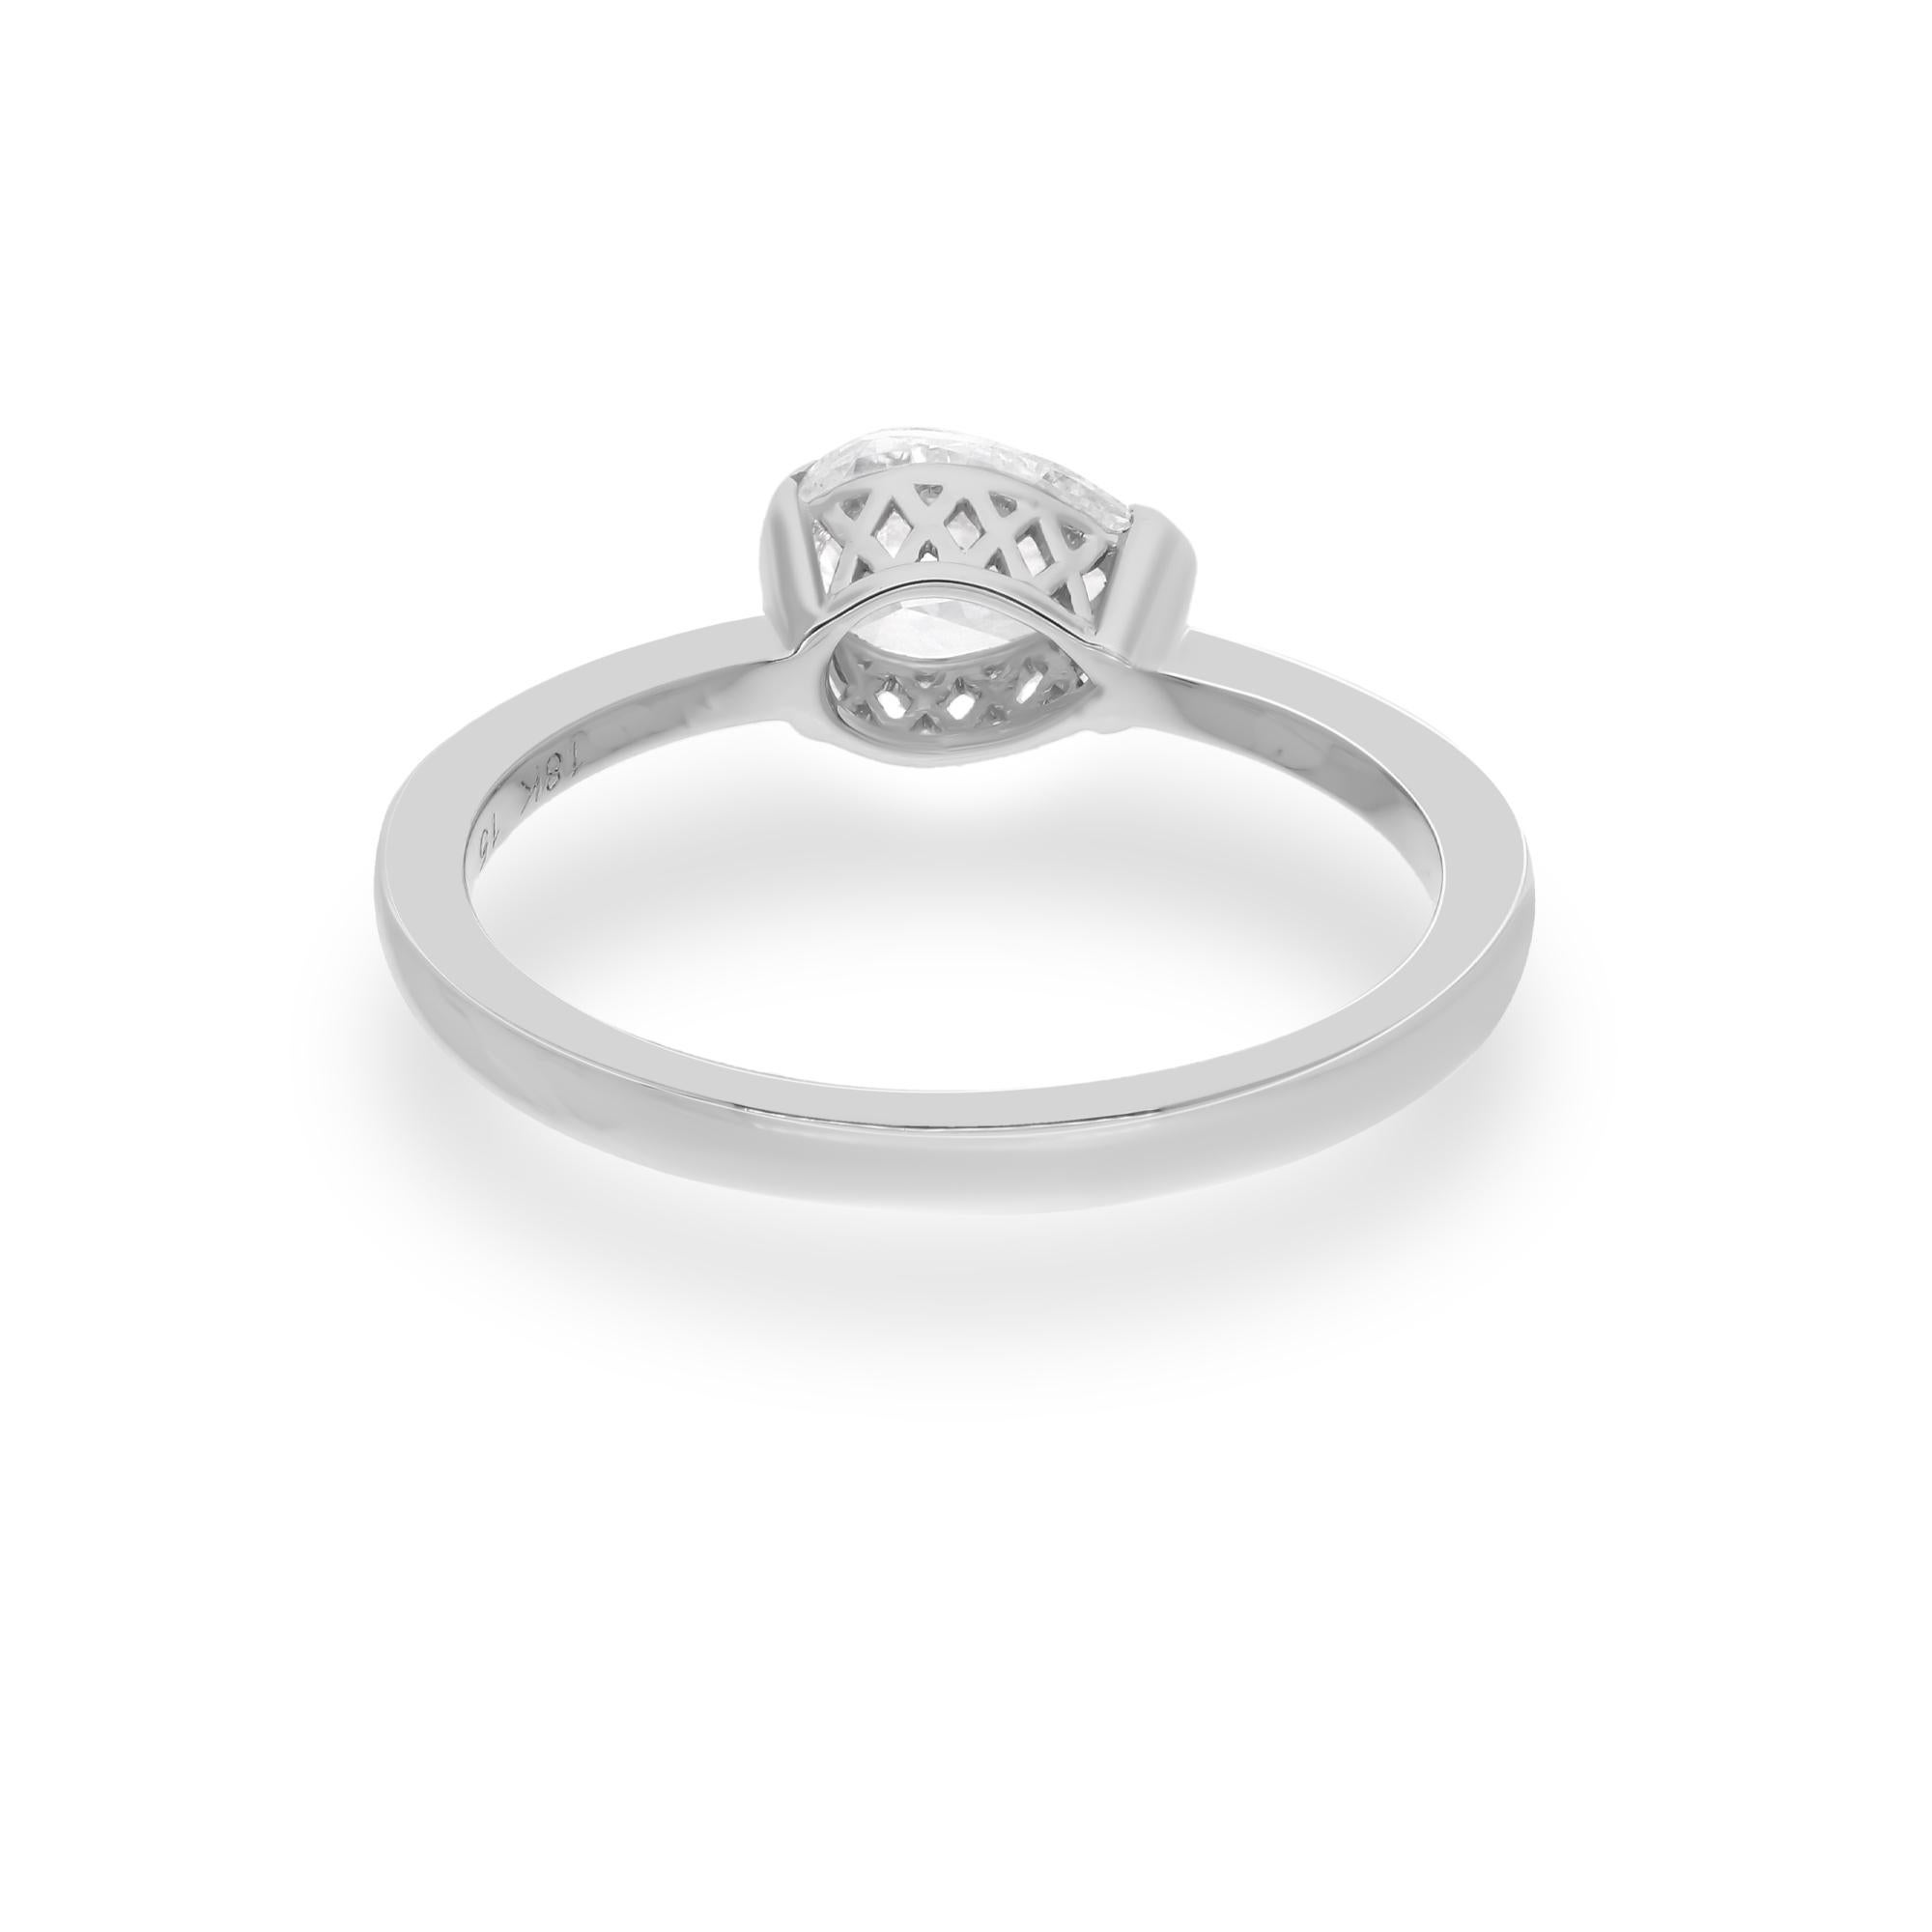 Immerse yourself in the unparalleled beauty and elegance of this exquisite SI Clarity HI Color Solitaire Pear Diamond Wedding Ring, meticulously crafted in luxurious 18 Karat White Gold. Designed to symbolize everlasting love and commitment, this